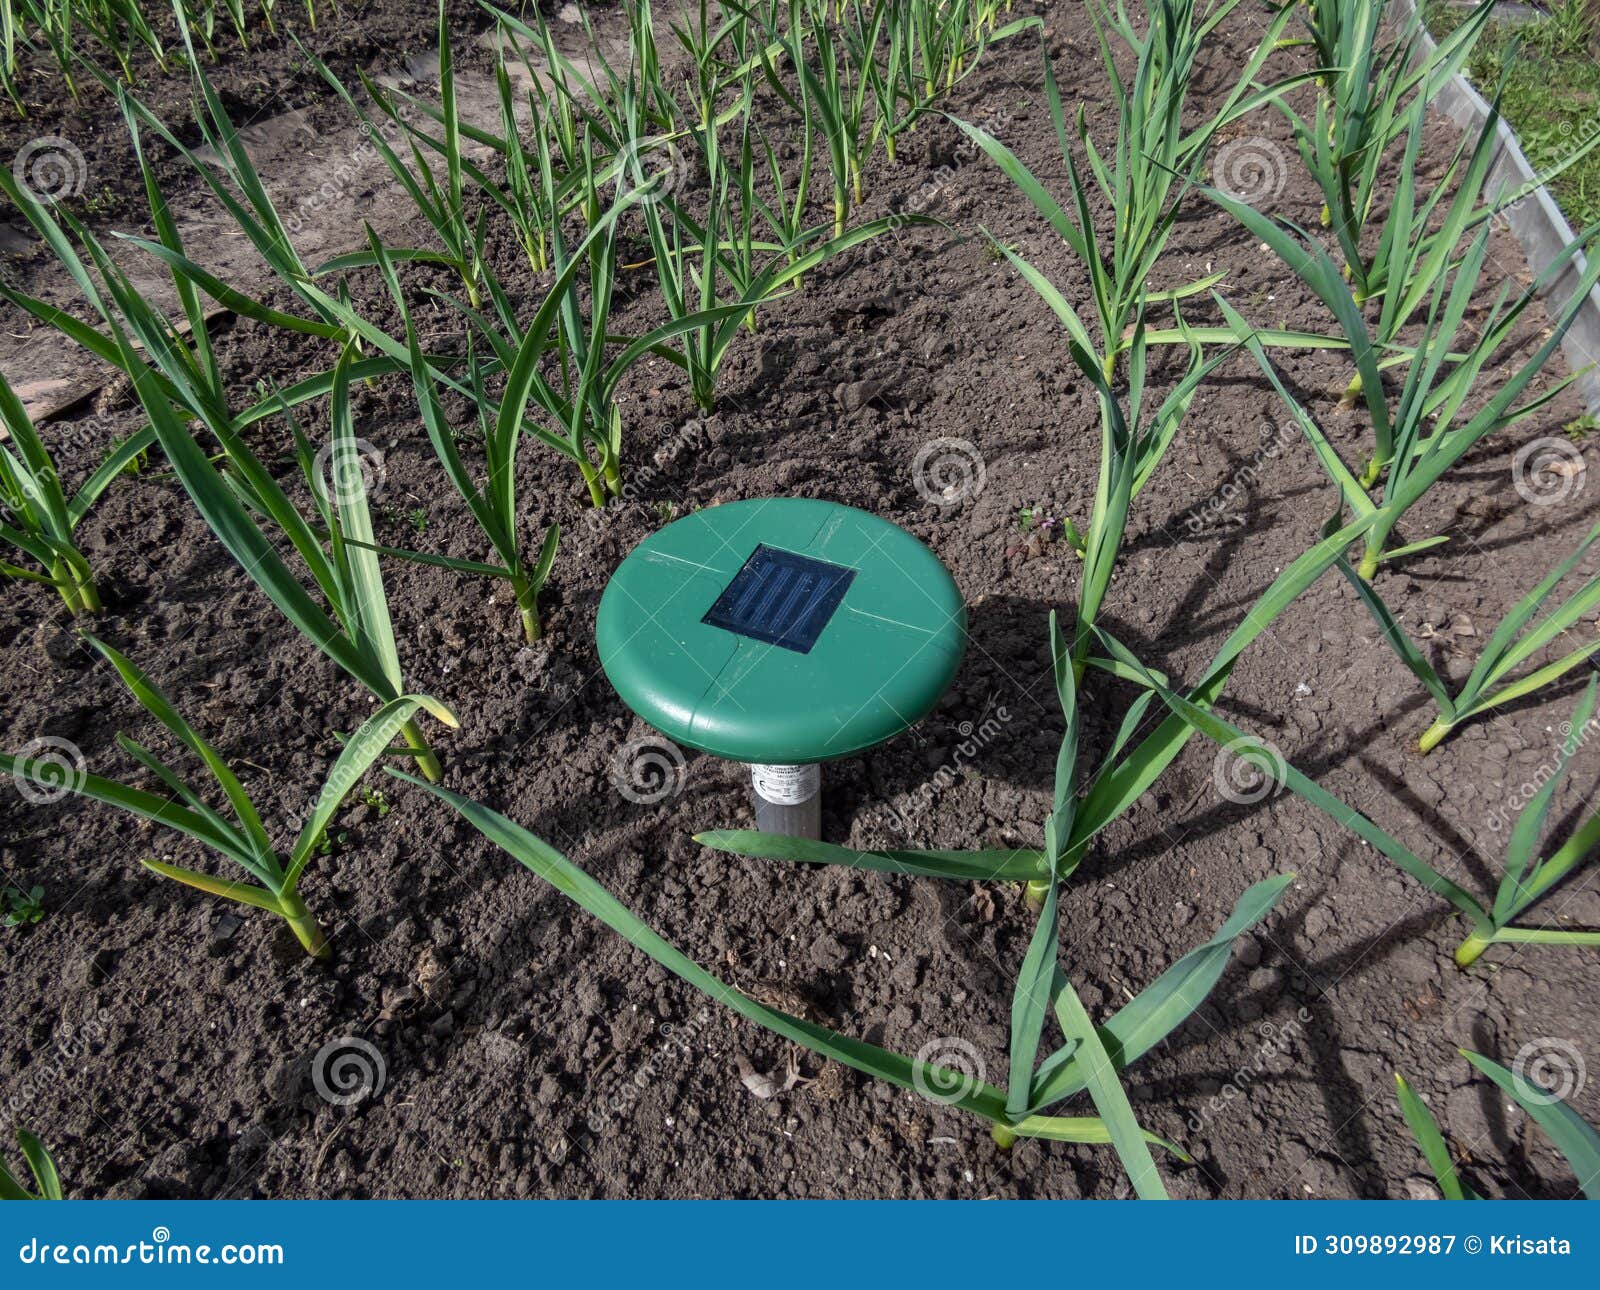 close-up of the ultrasonic, solar-powered mole repellent or repeller device in the soil in a vegetable bed among small onion